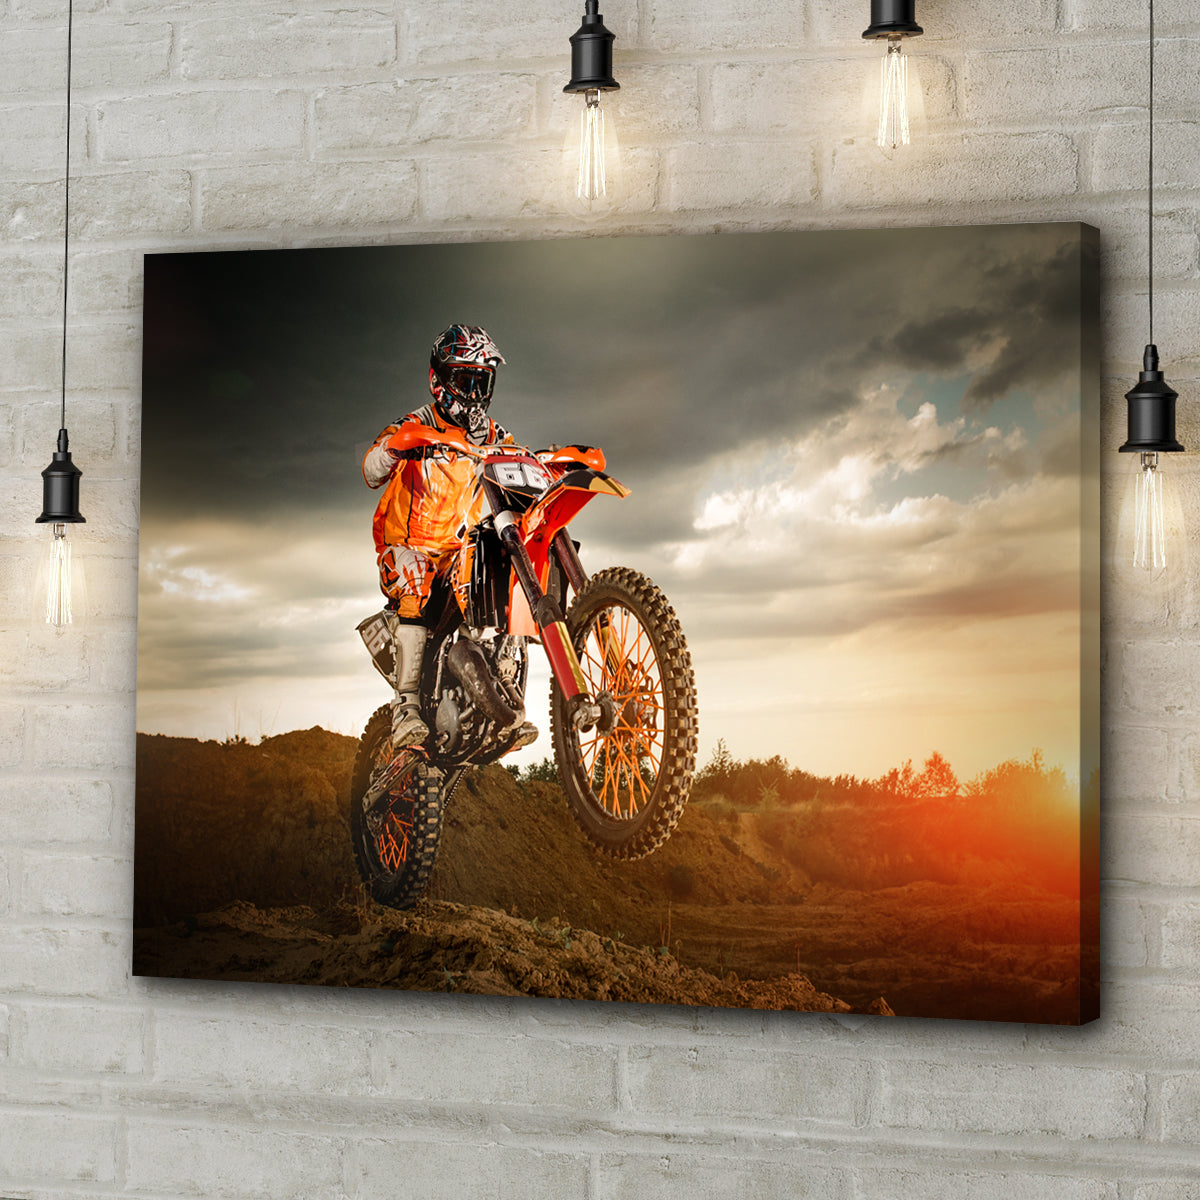 Motocross Rider Stunt Canvas Wall Art Style 2 - Image by Tailored Canvases